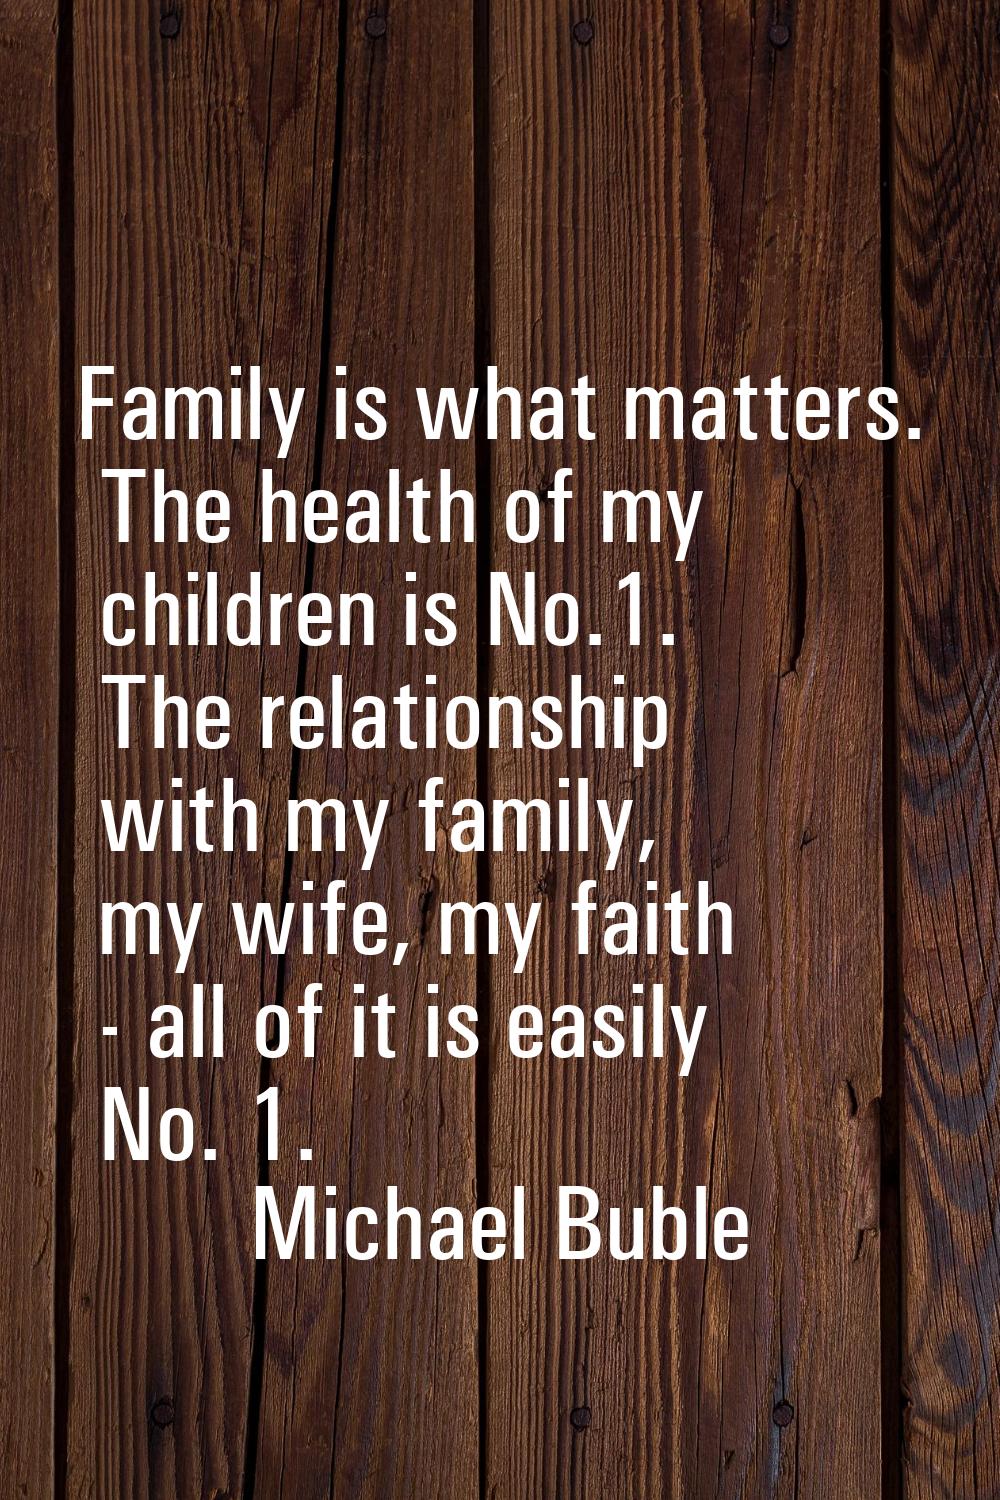 Family is what matters. The health of my children is No.1. The relationship with my family, my wife